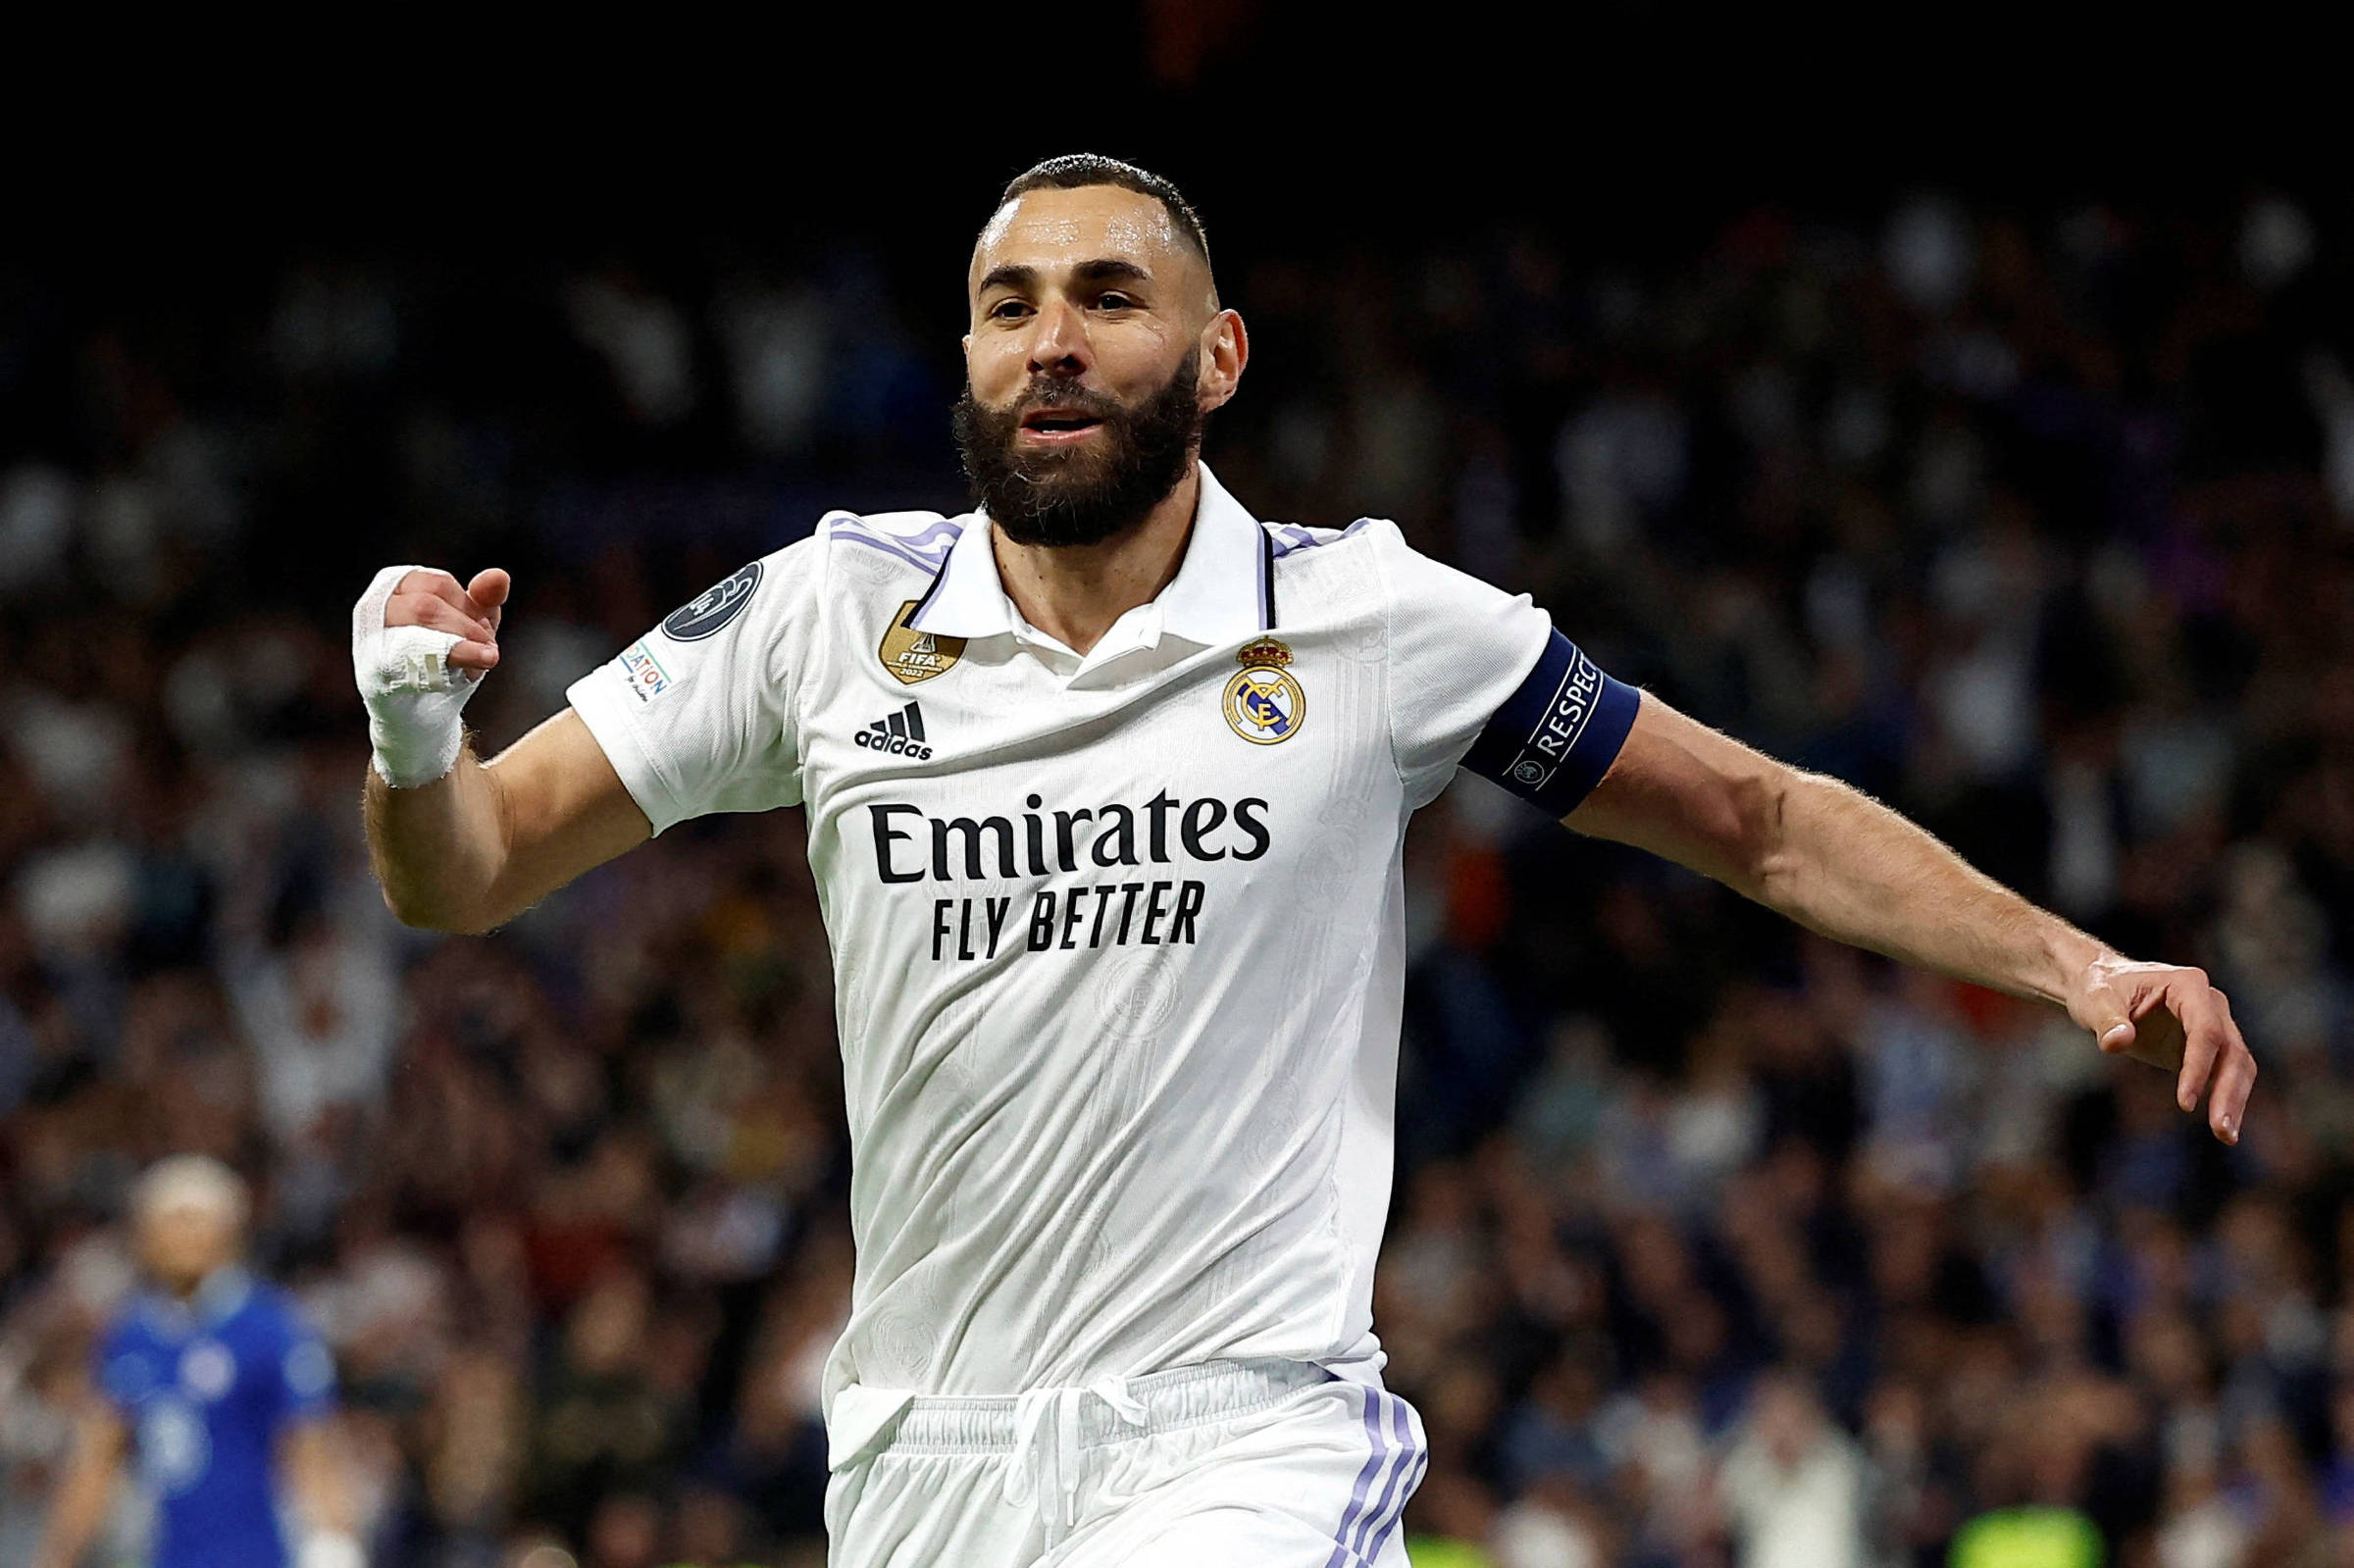 Benzema says goodbye to Real Madrid as one of its greats in history